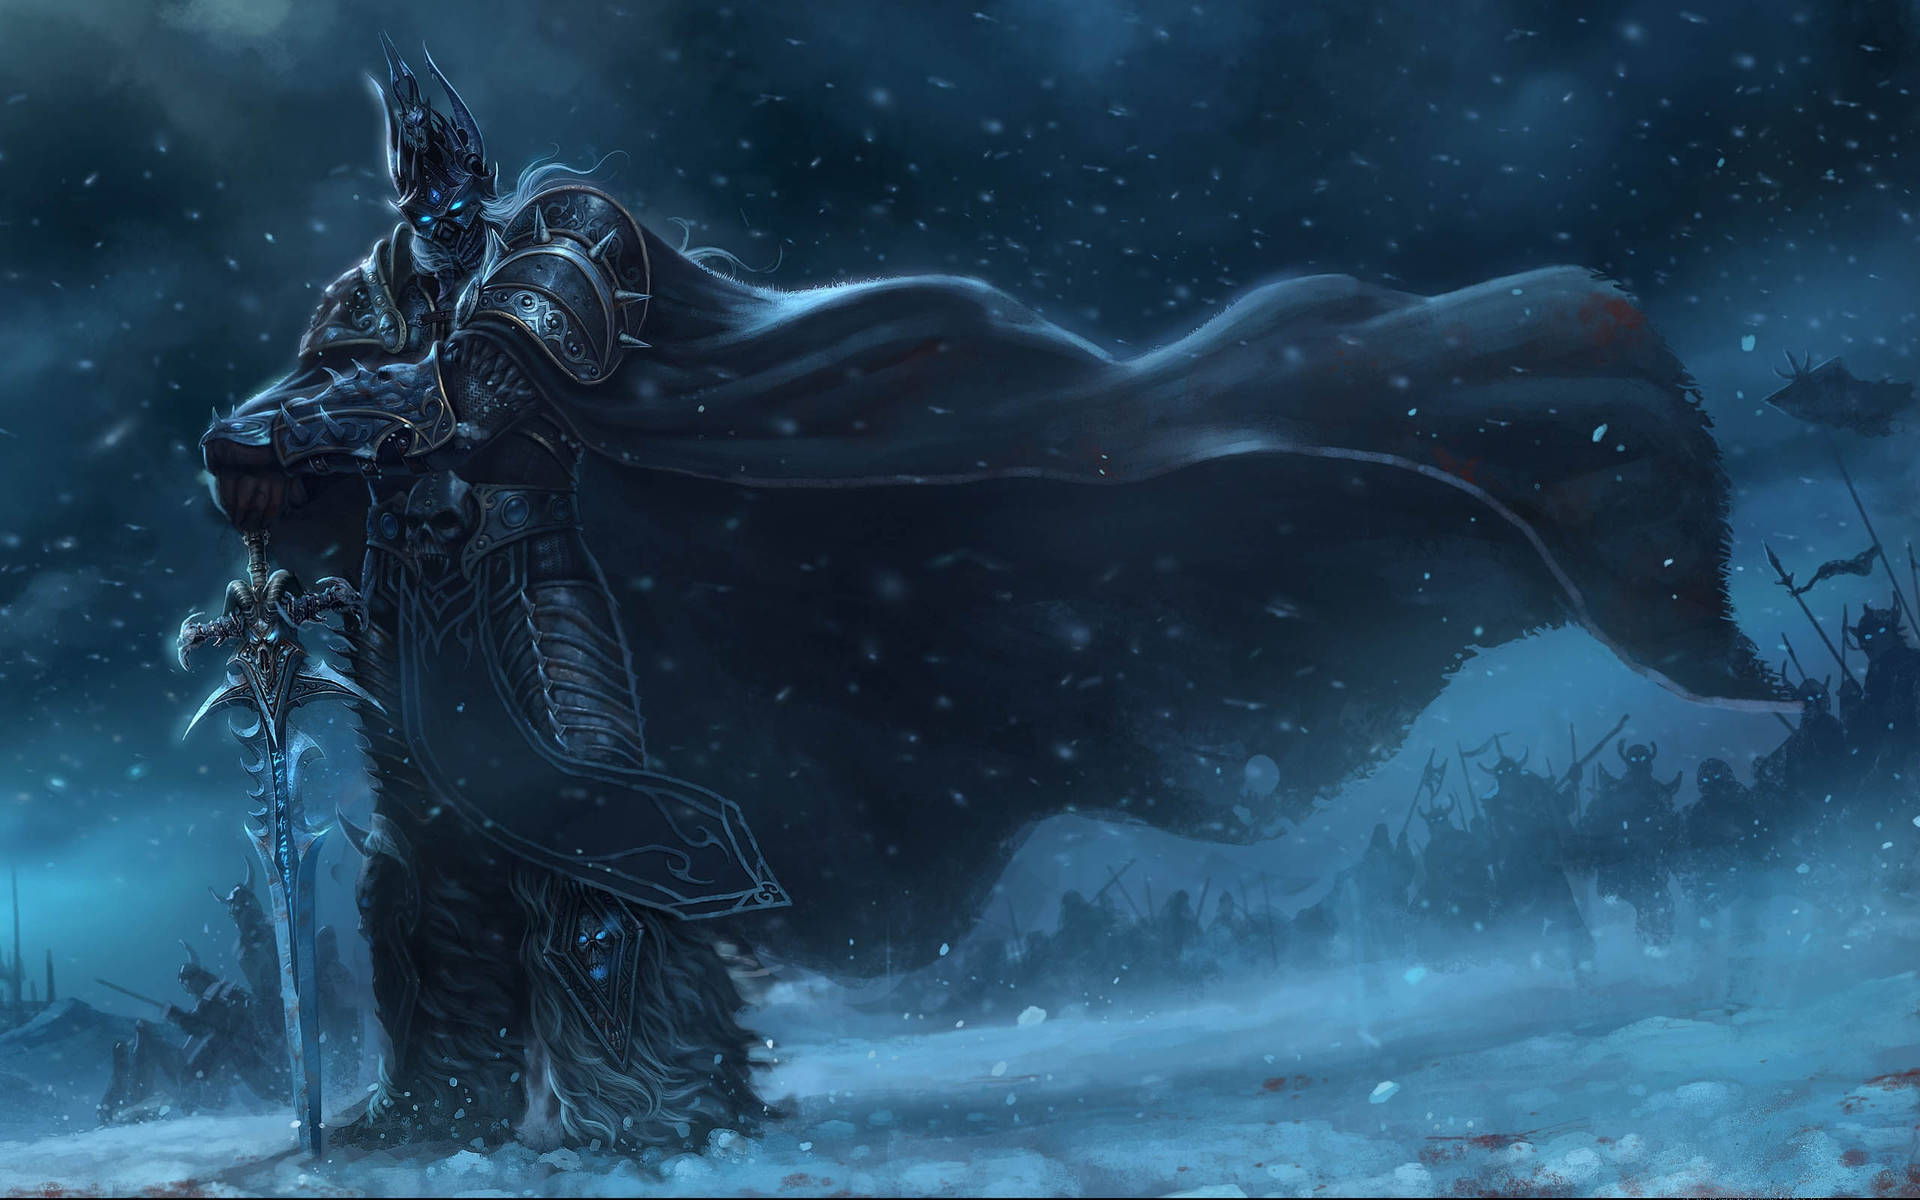 Wrath Of The Lich King Poster Wallpaper